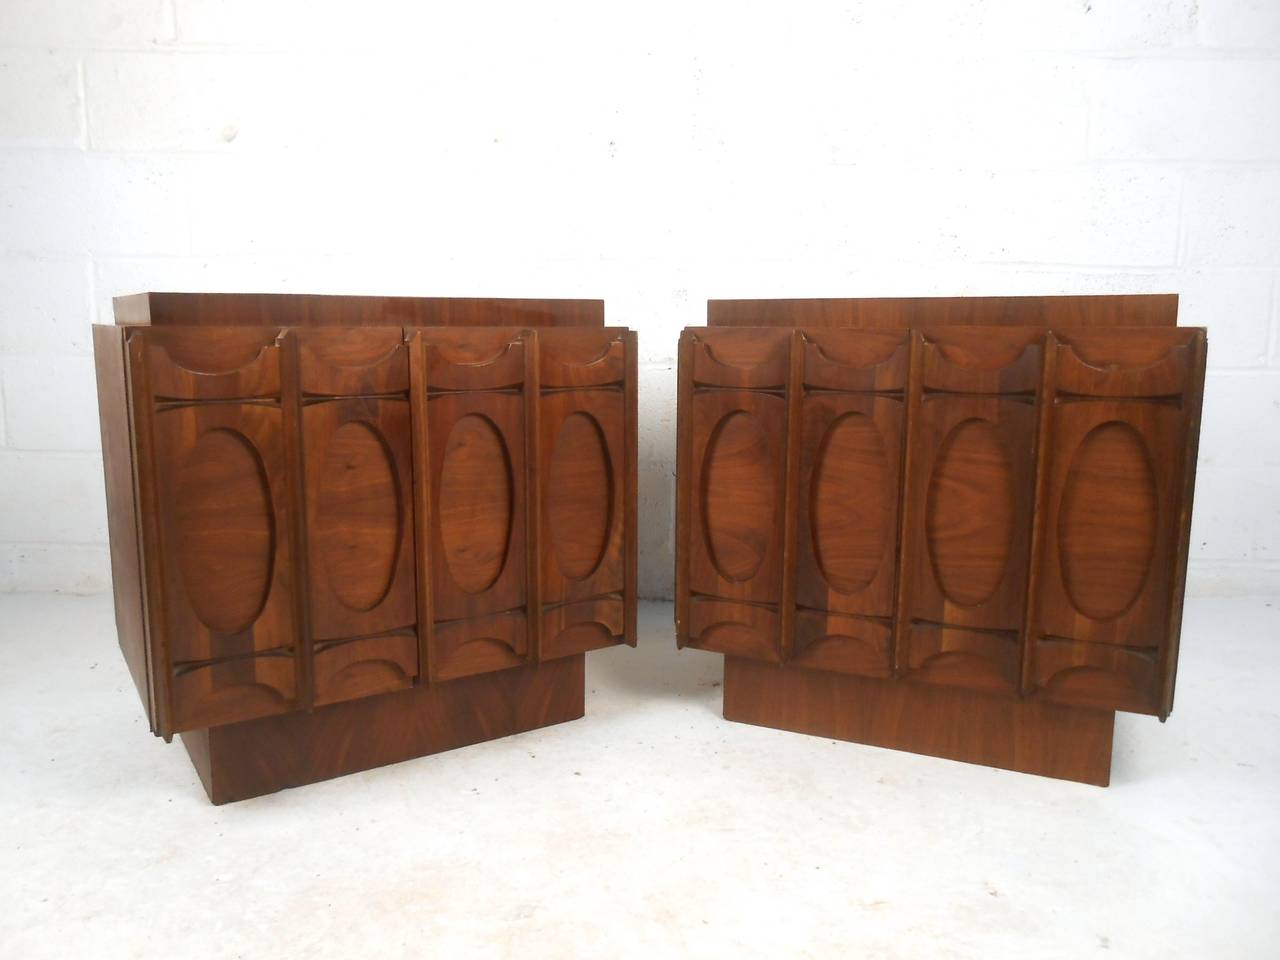 This Brasilia style pair of nightstands offer cabinet style shelf storage within a uniquely Mid-Century design. This Brutalist feeling pair work great in any room, please confirm item location (NY or NJ).